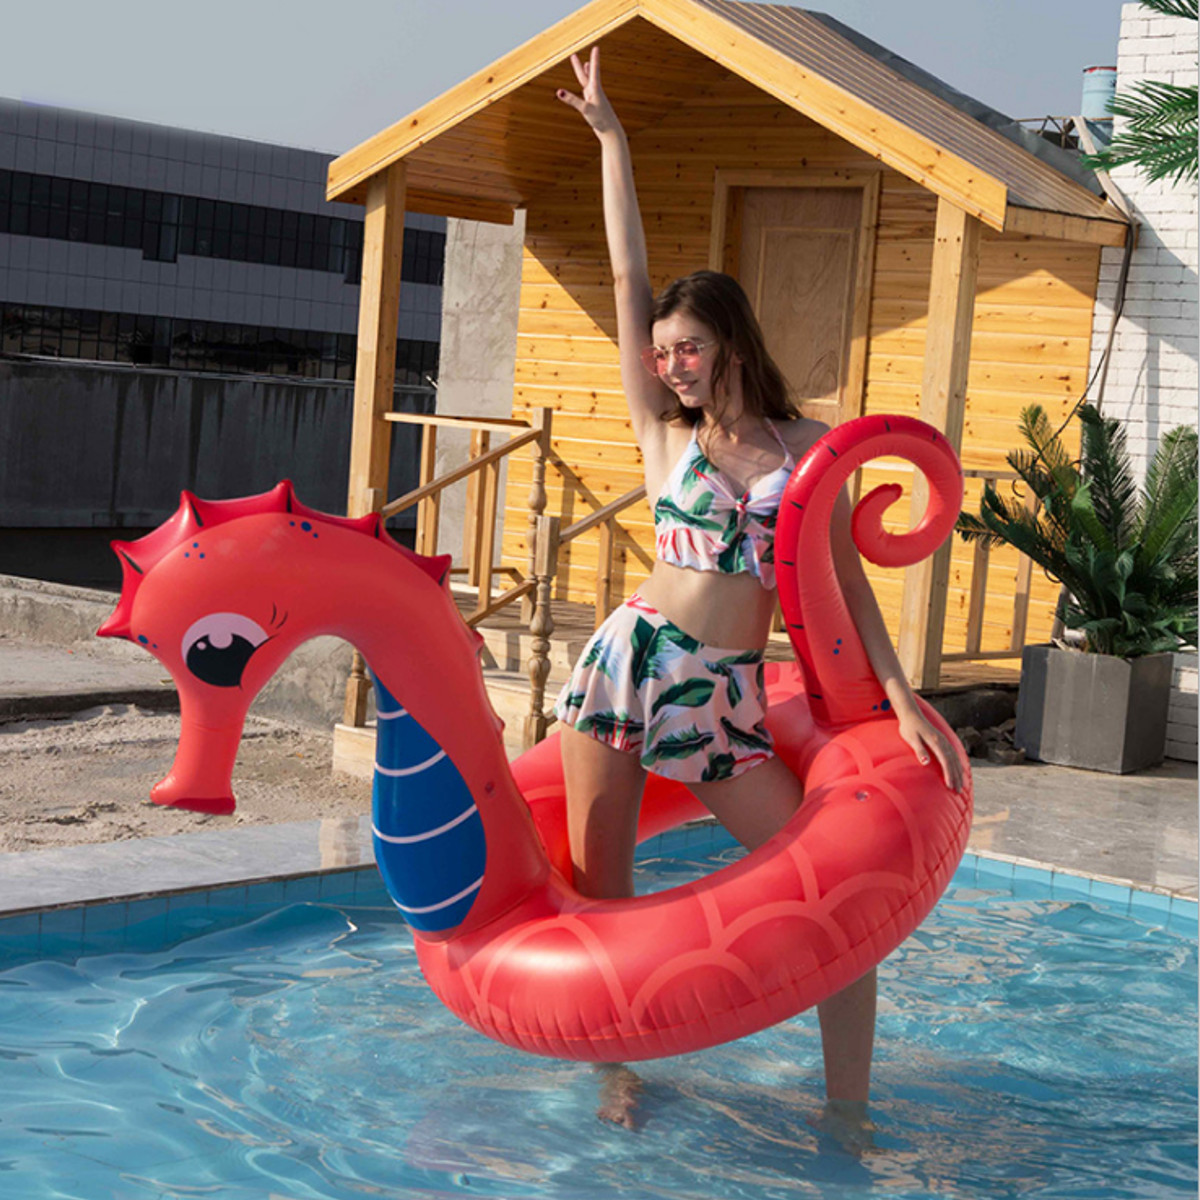 Large-Seahorse-Inflatable-Hippocampus-Giant-Swimming-Pool-Ring-Floats-Bed-Water-Pool-Raft-Camping-Be-1723619-13